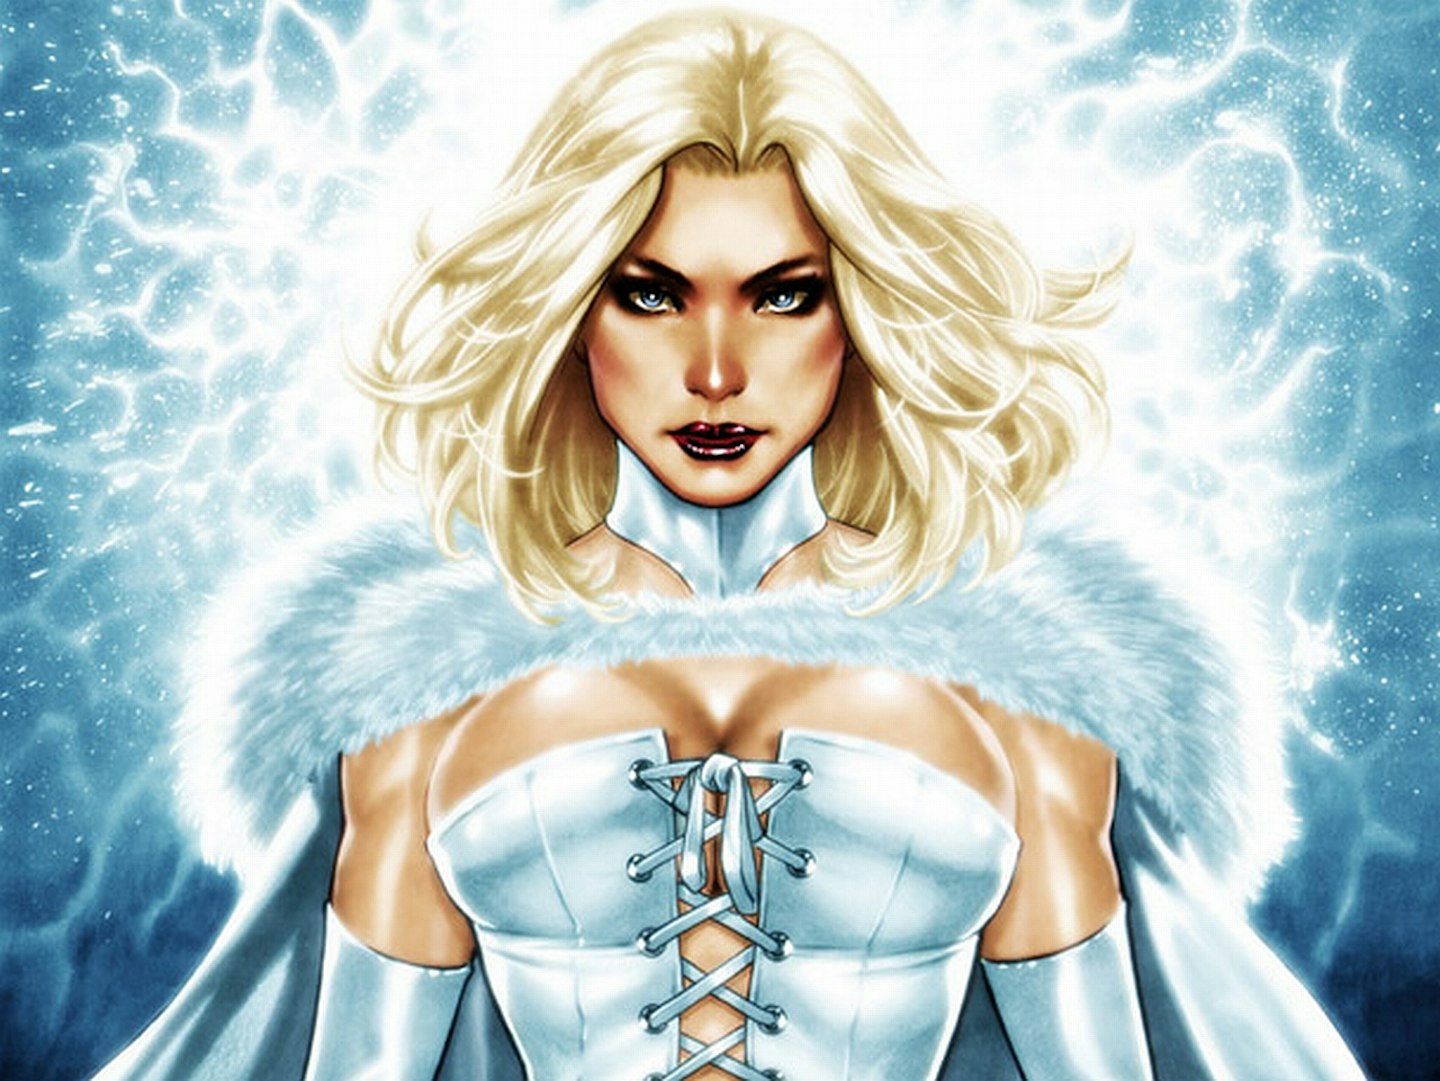 Emma Frost from the X-Men series